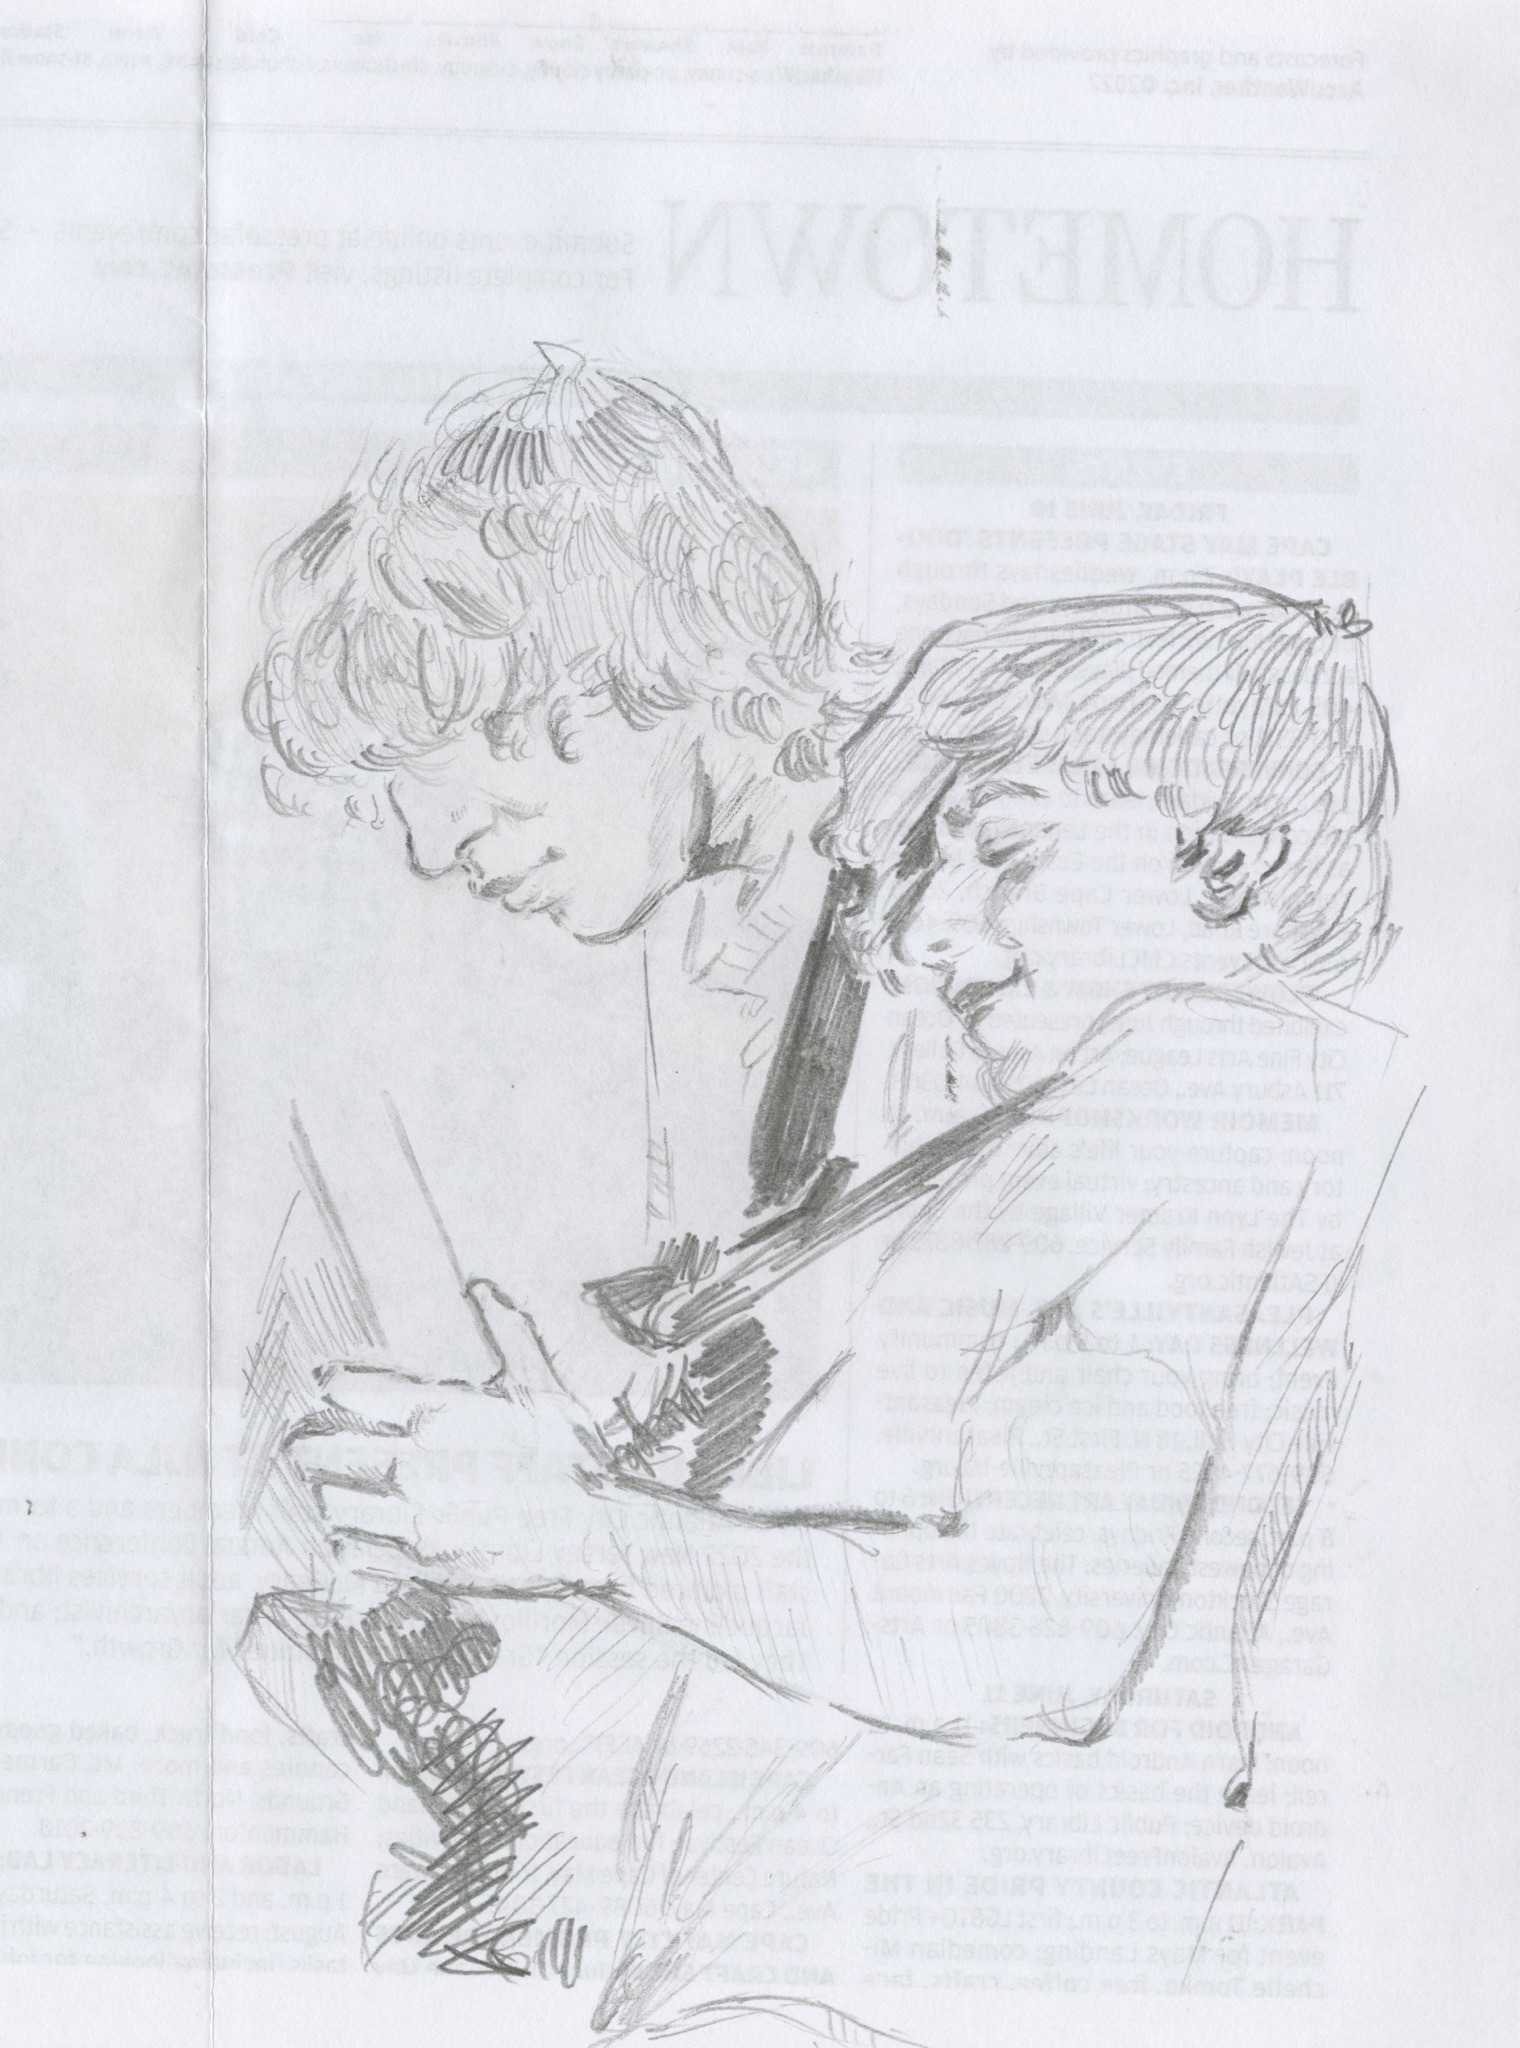 pencil sketch of dean and gene ween of the band ween, dean is in the background, both are playing guitar, printed text is visible behind the paper.